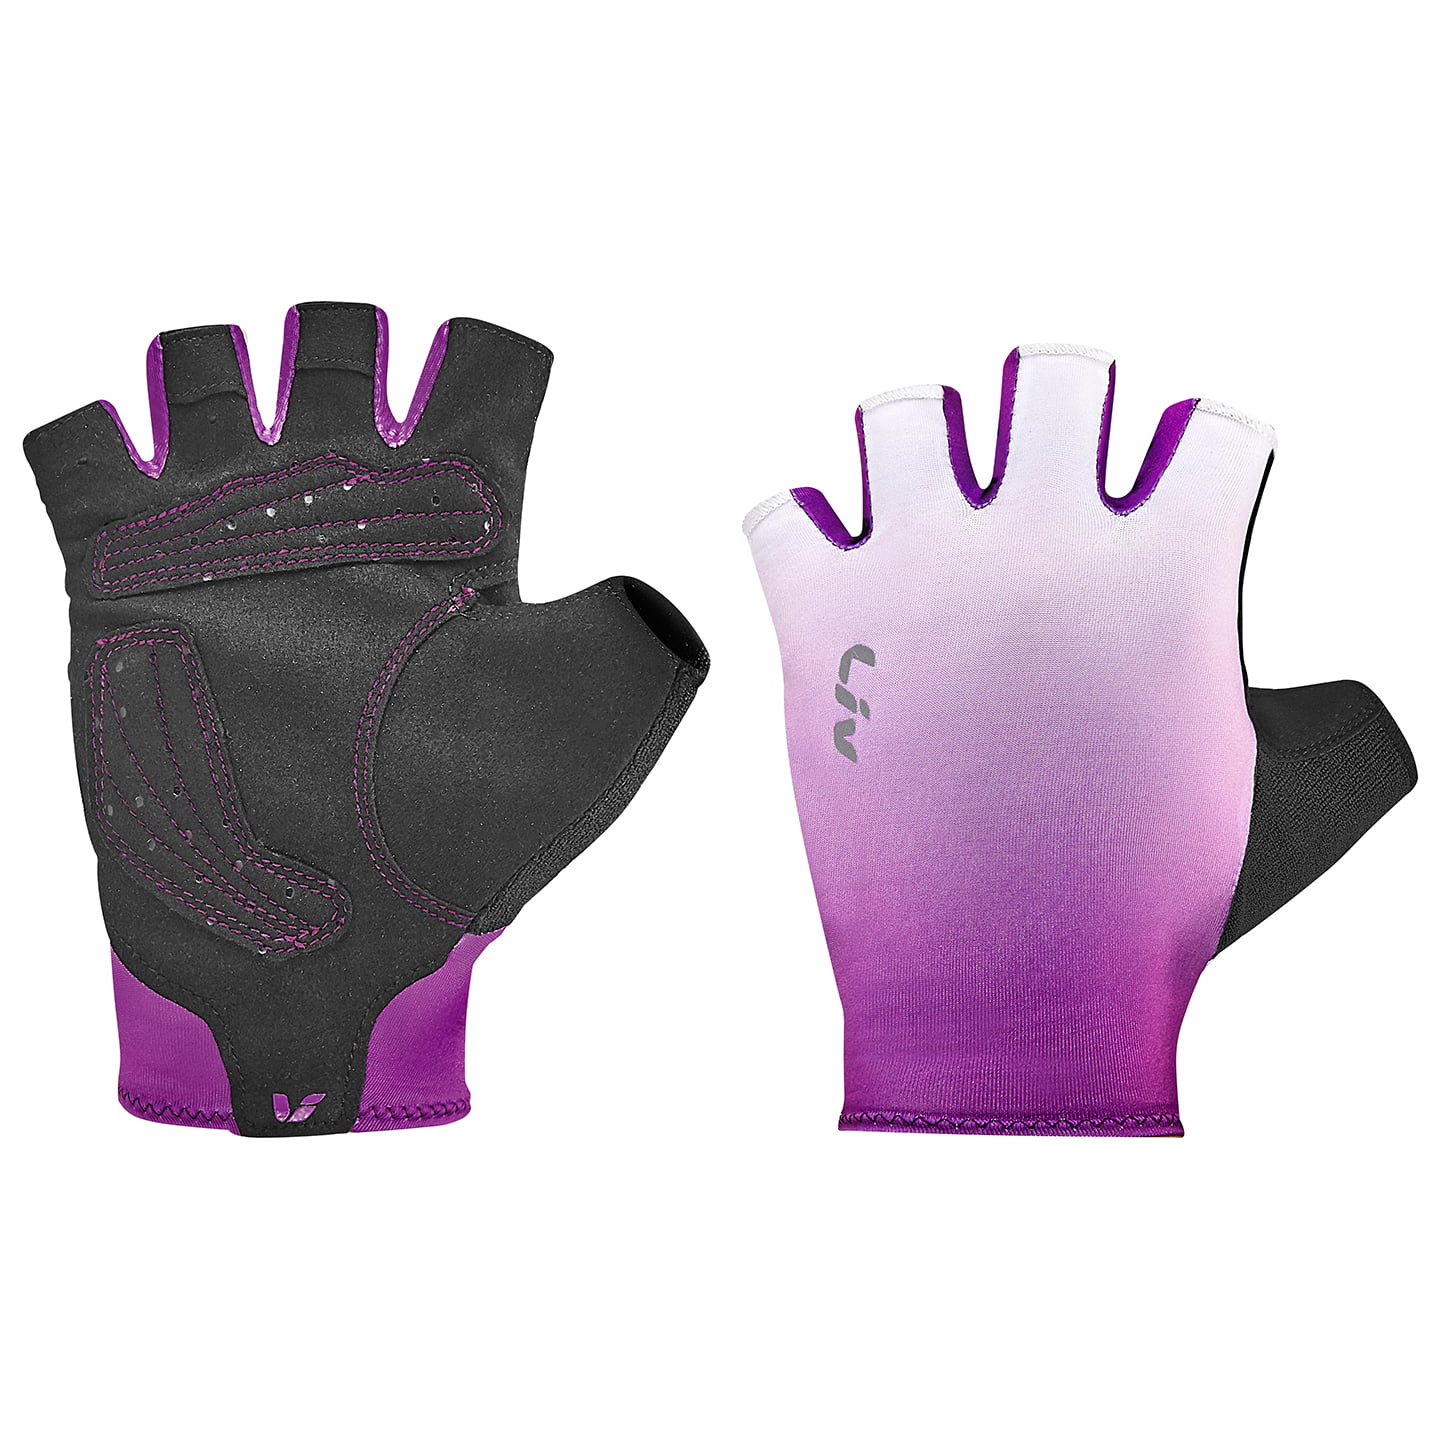 LIV Race Day Women’s Gloves Women’s Cycling Gloves, size S, MTB gloves, MTB clothing